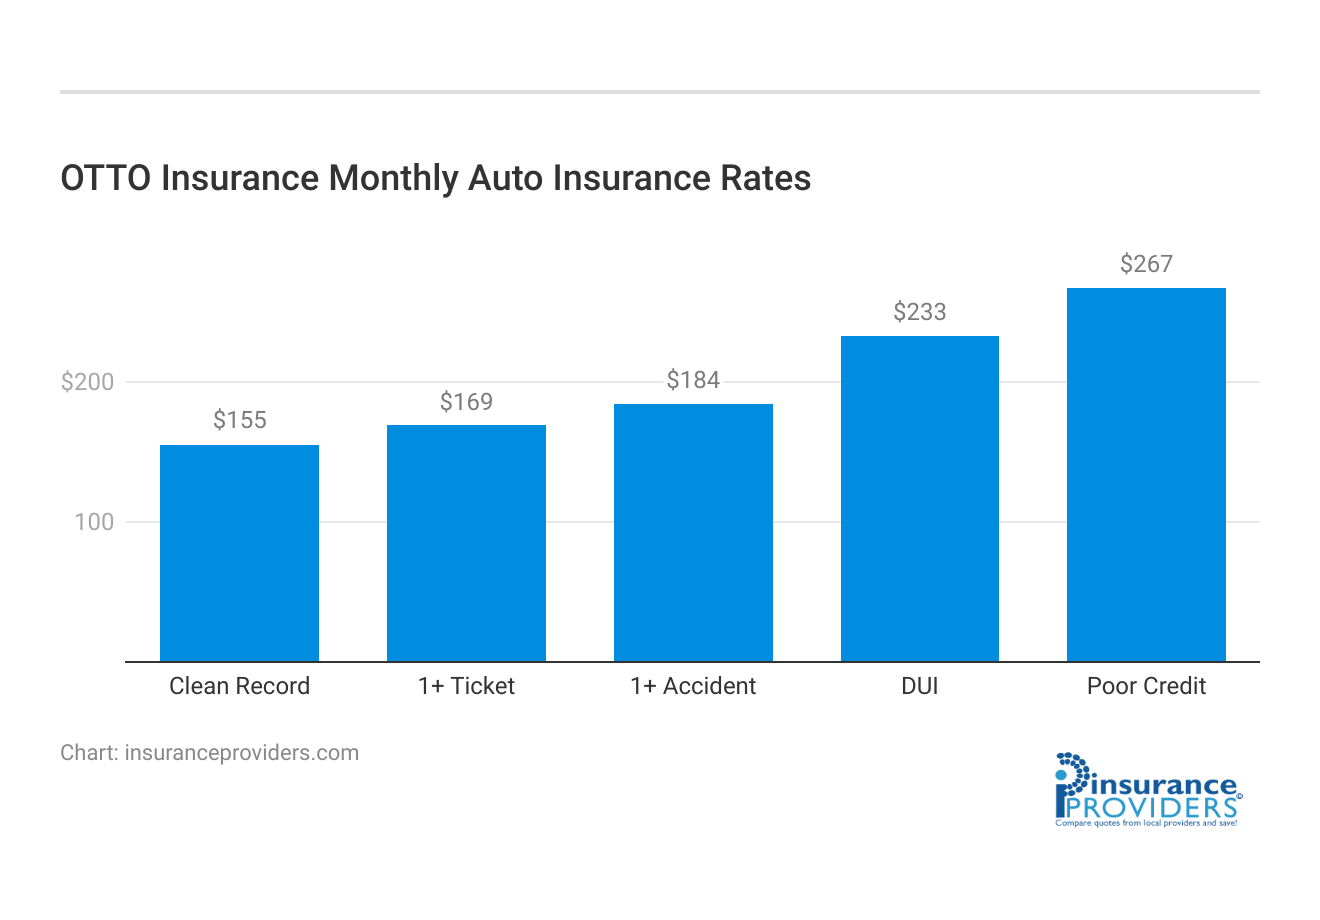 <h3>OTTO Insurance Monthly Auto Insurance Rates</h3>